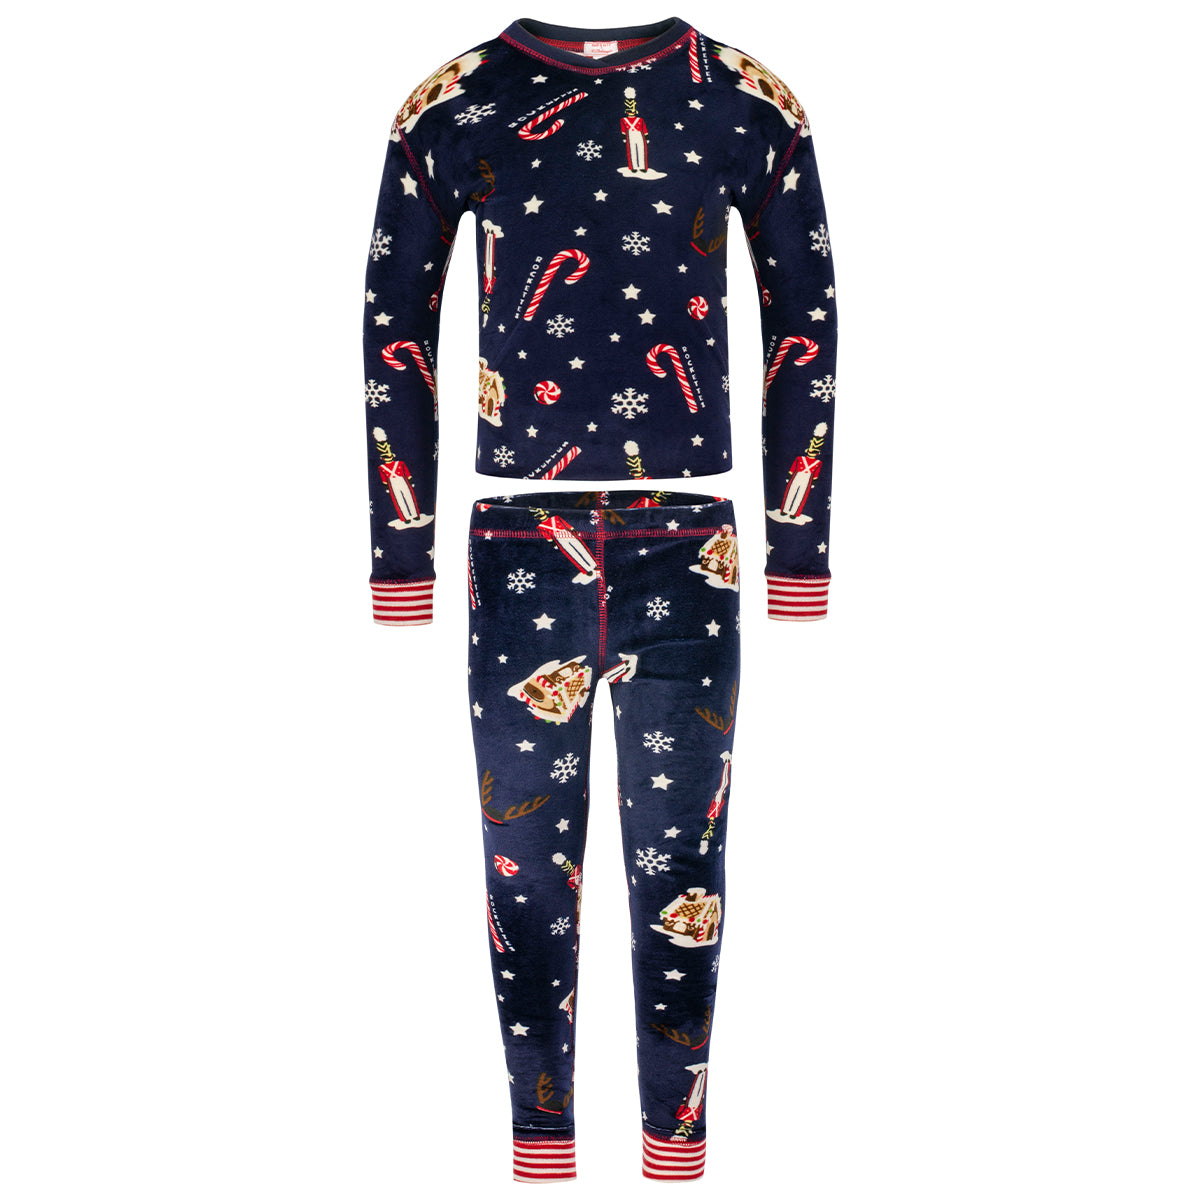 Blue Christmas pajamas from front view with snowy print, candy-cane patterns and toy soldier design